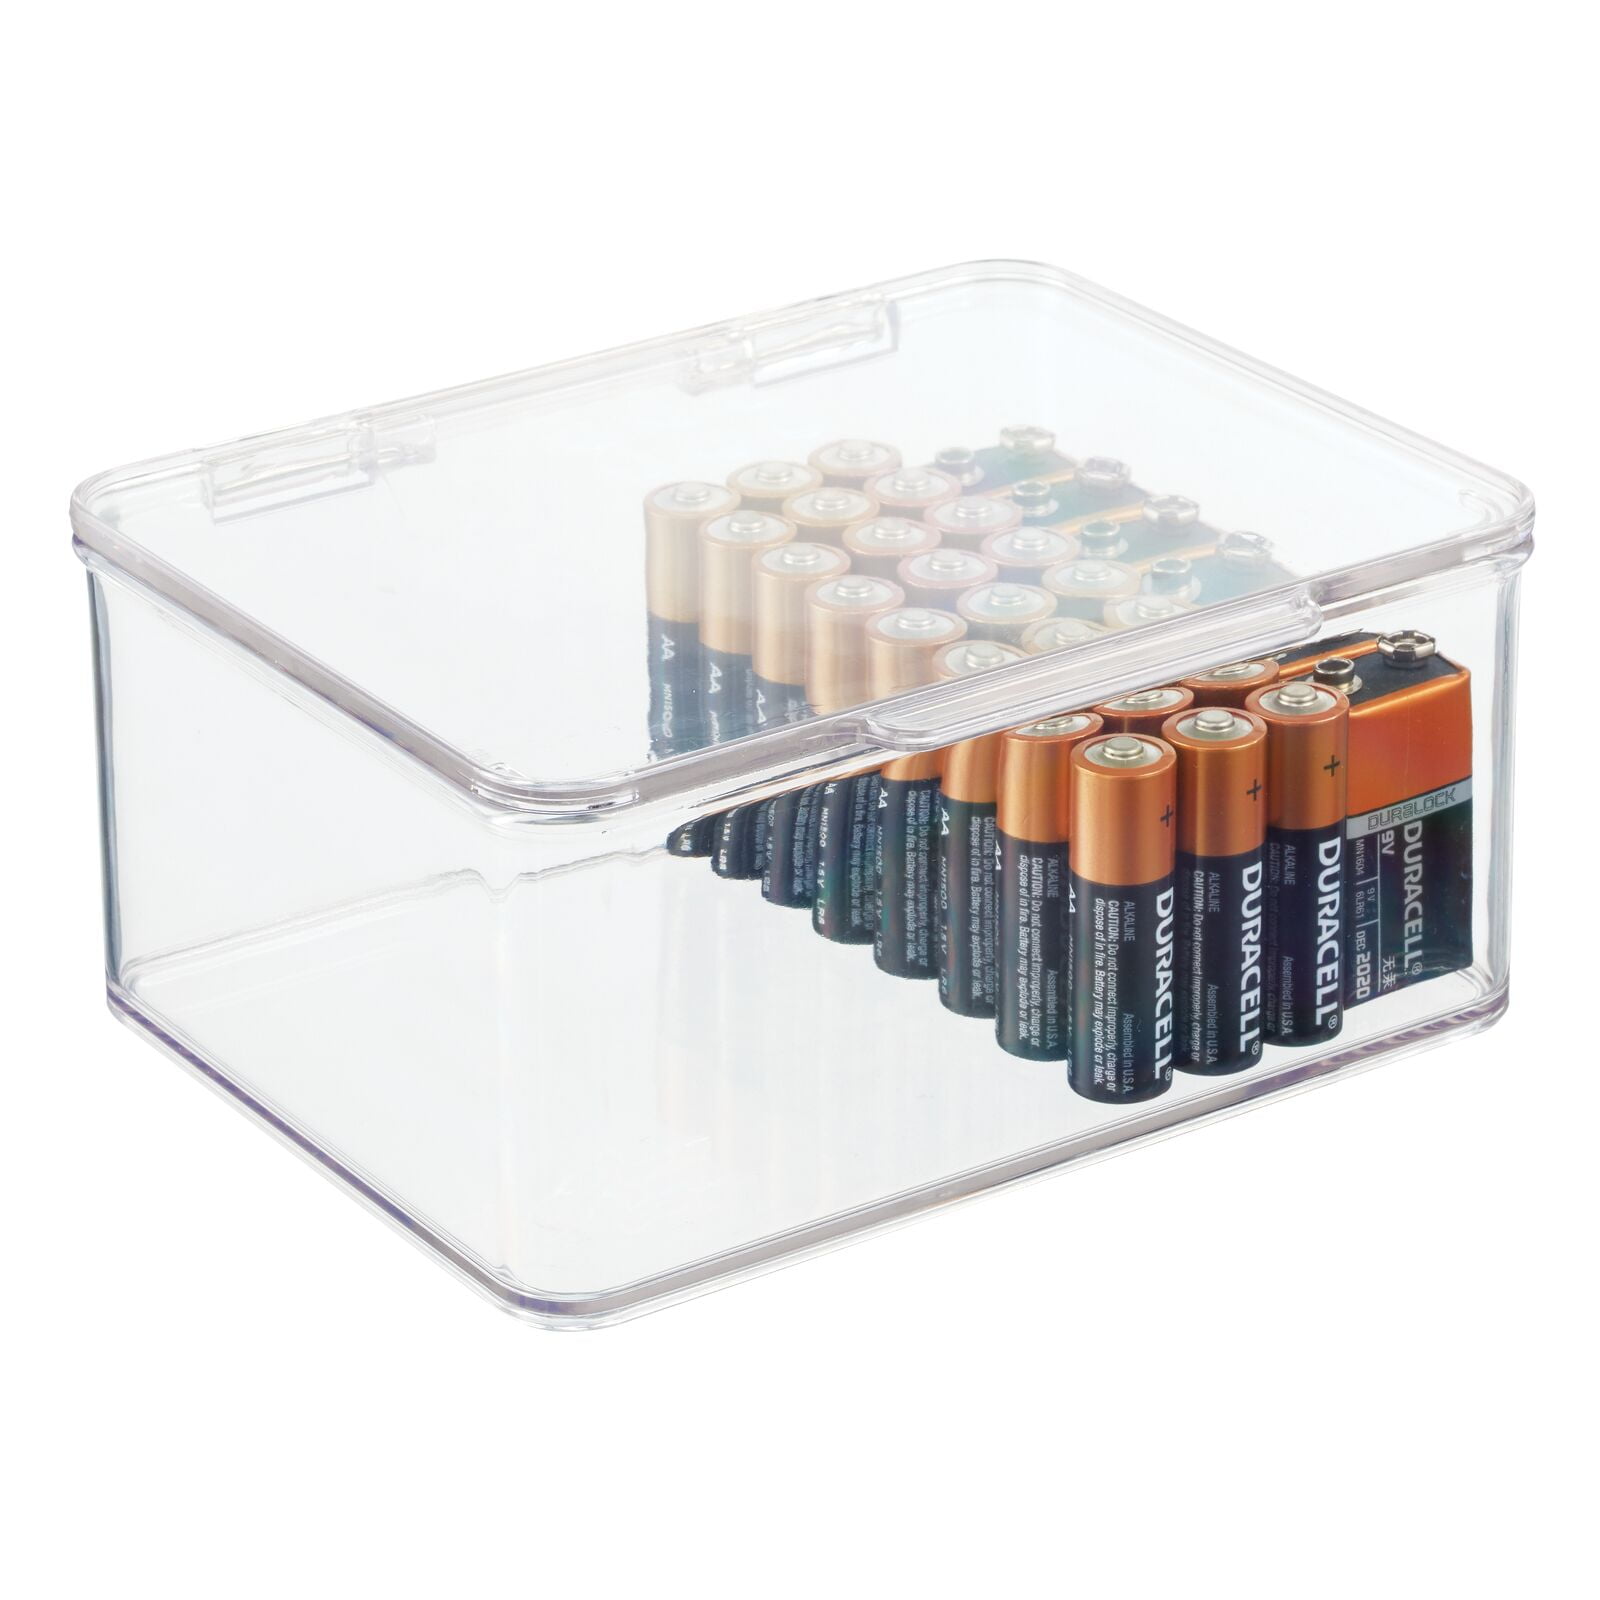 mDesign Plastic Home Office Storage Organizer Box with Hinged Lid, 4 Pack, Clear, Size: 3.62 x 5.75 x 6.62